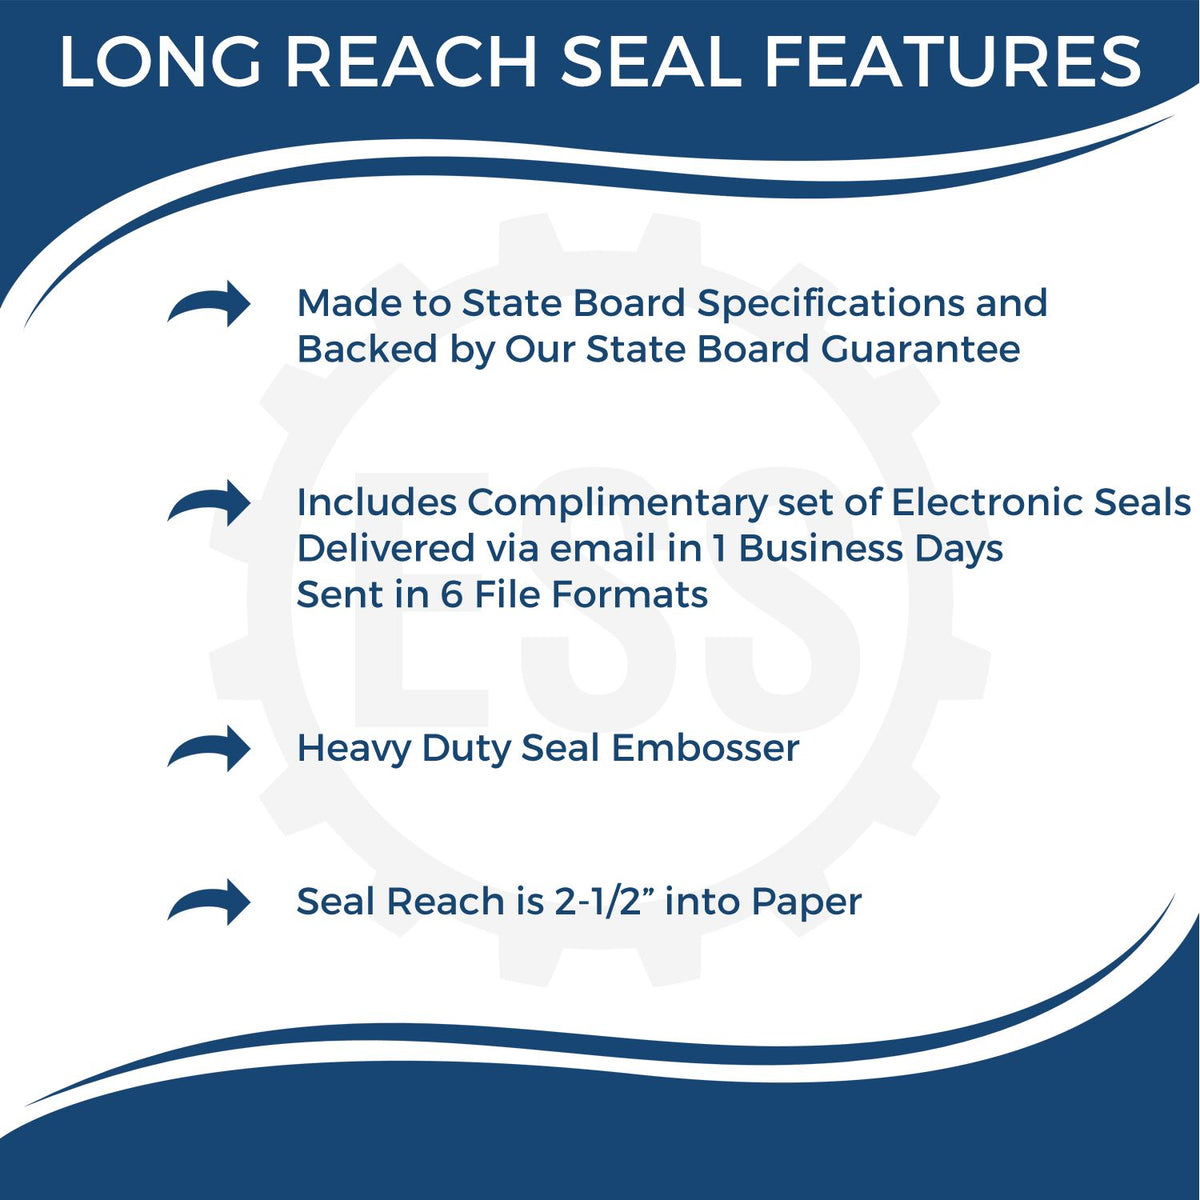 A picture of an infographic highlighting the selling points for the Long Reach Virginia Geology Seal